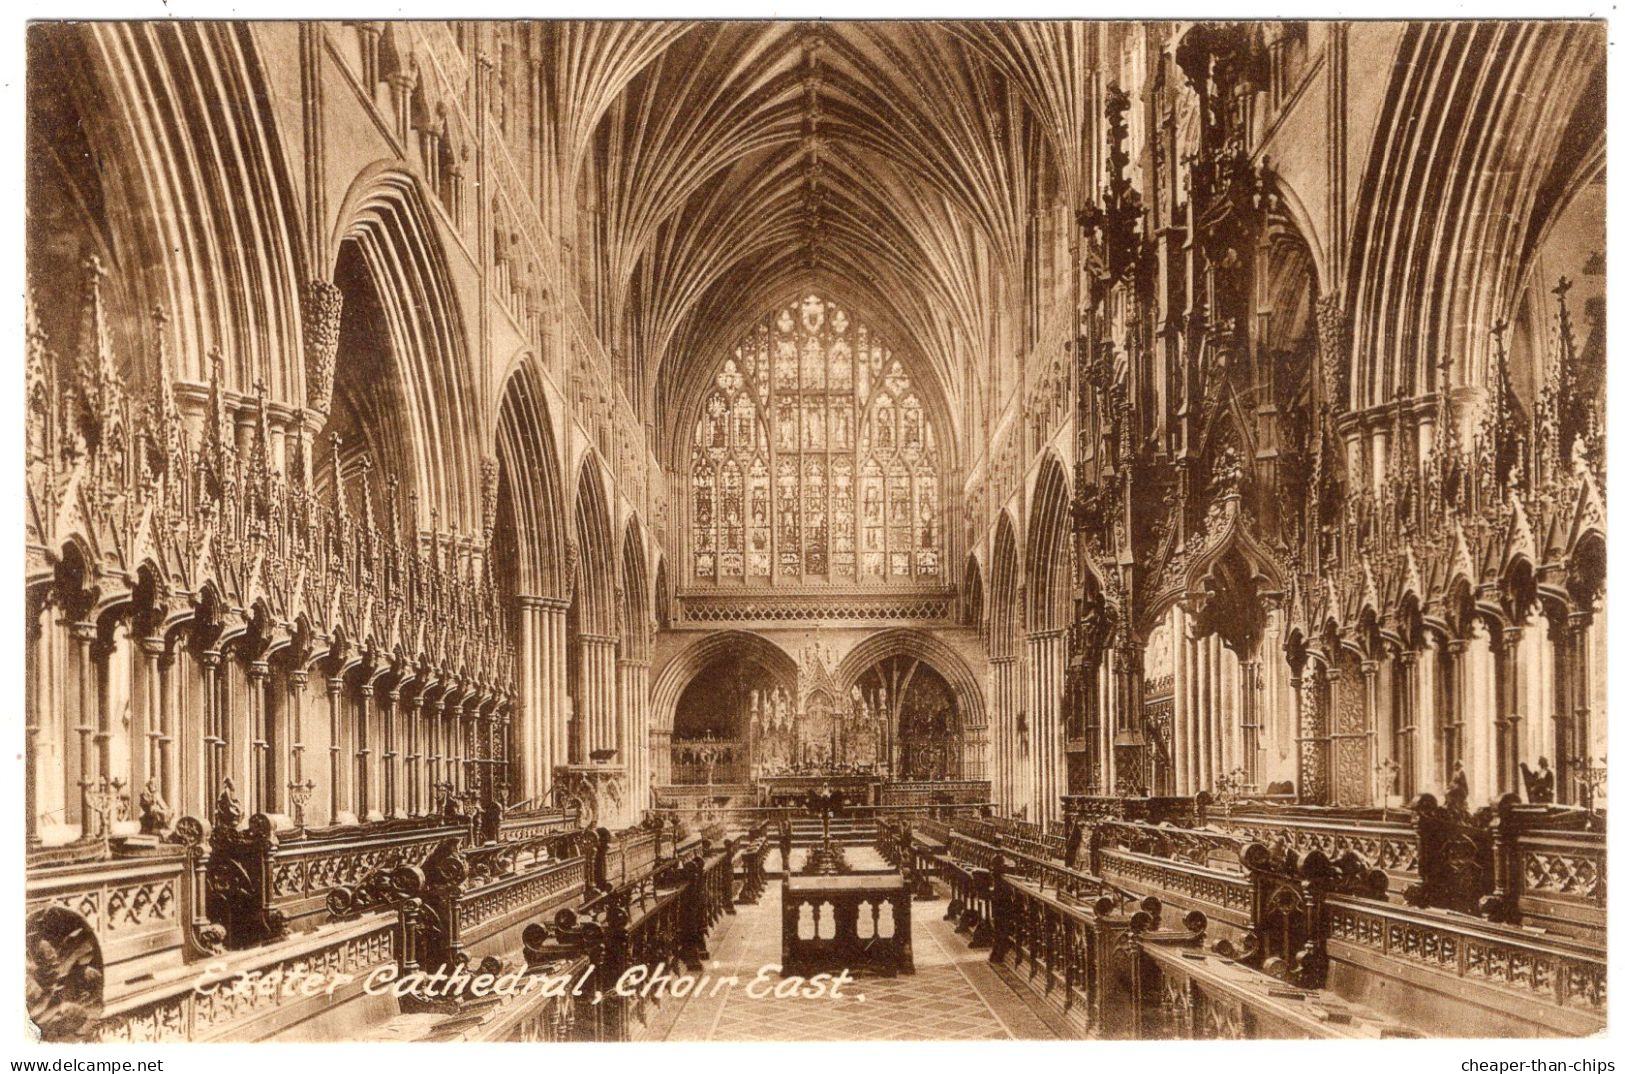 EXETER CATHEDRAL - Choir East - Frith 19621 - Exeter